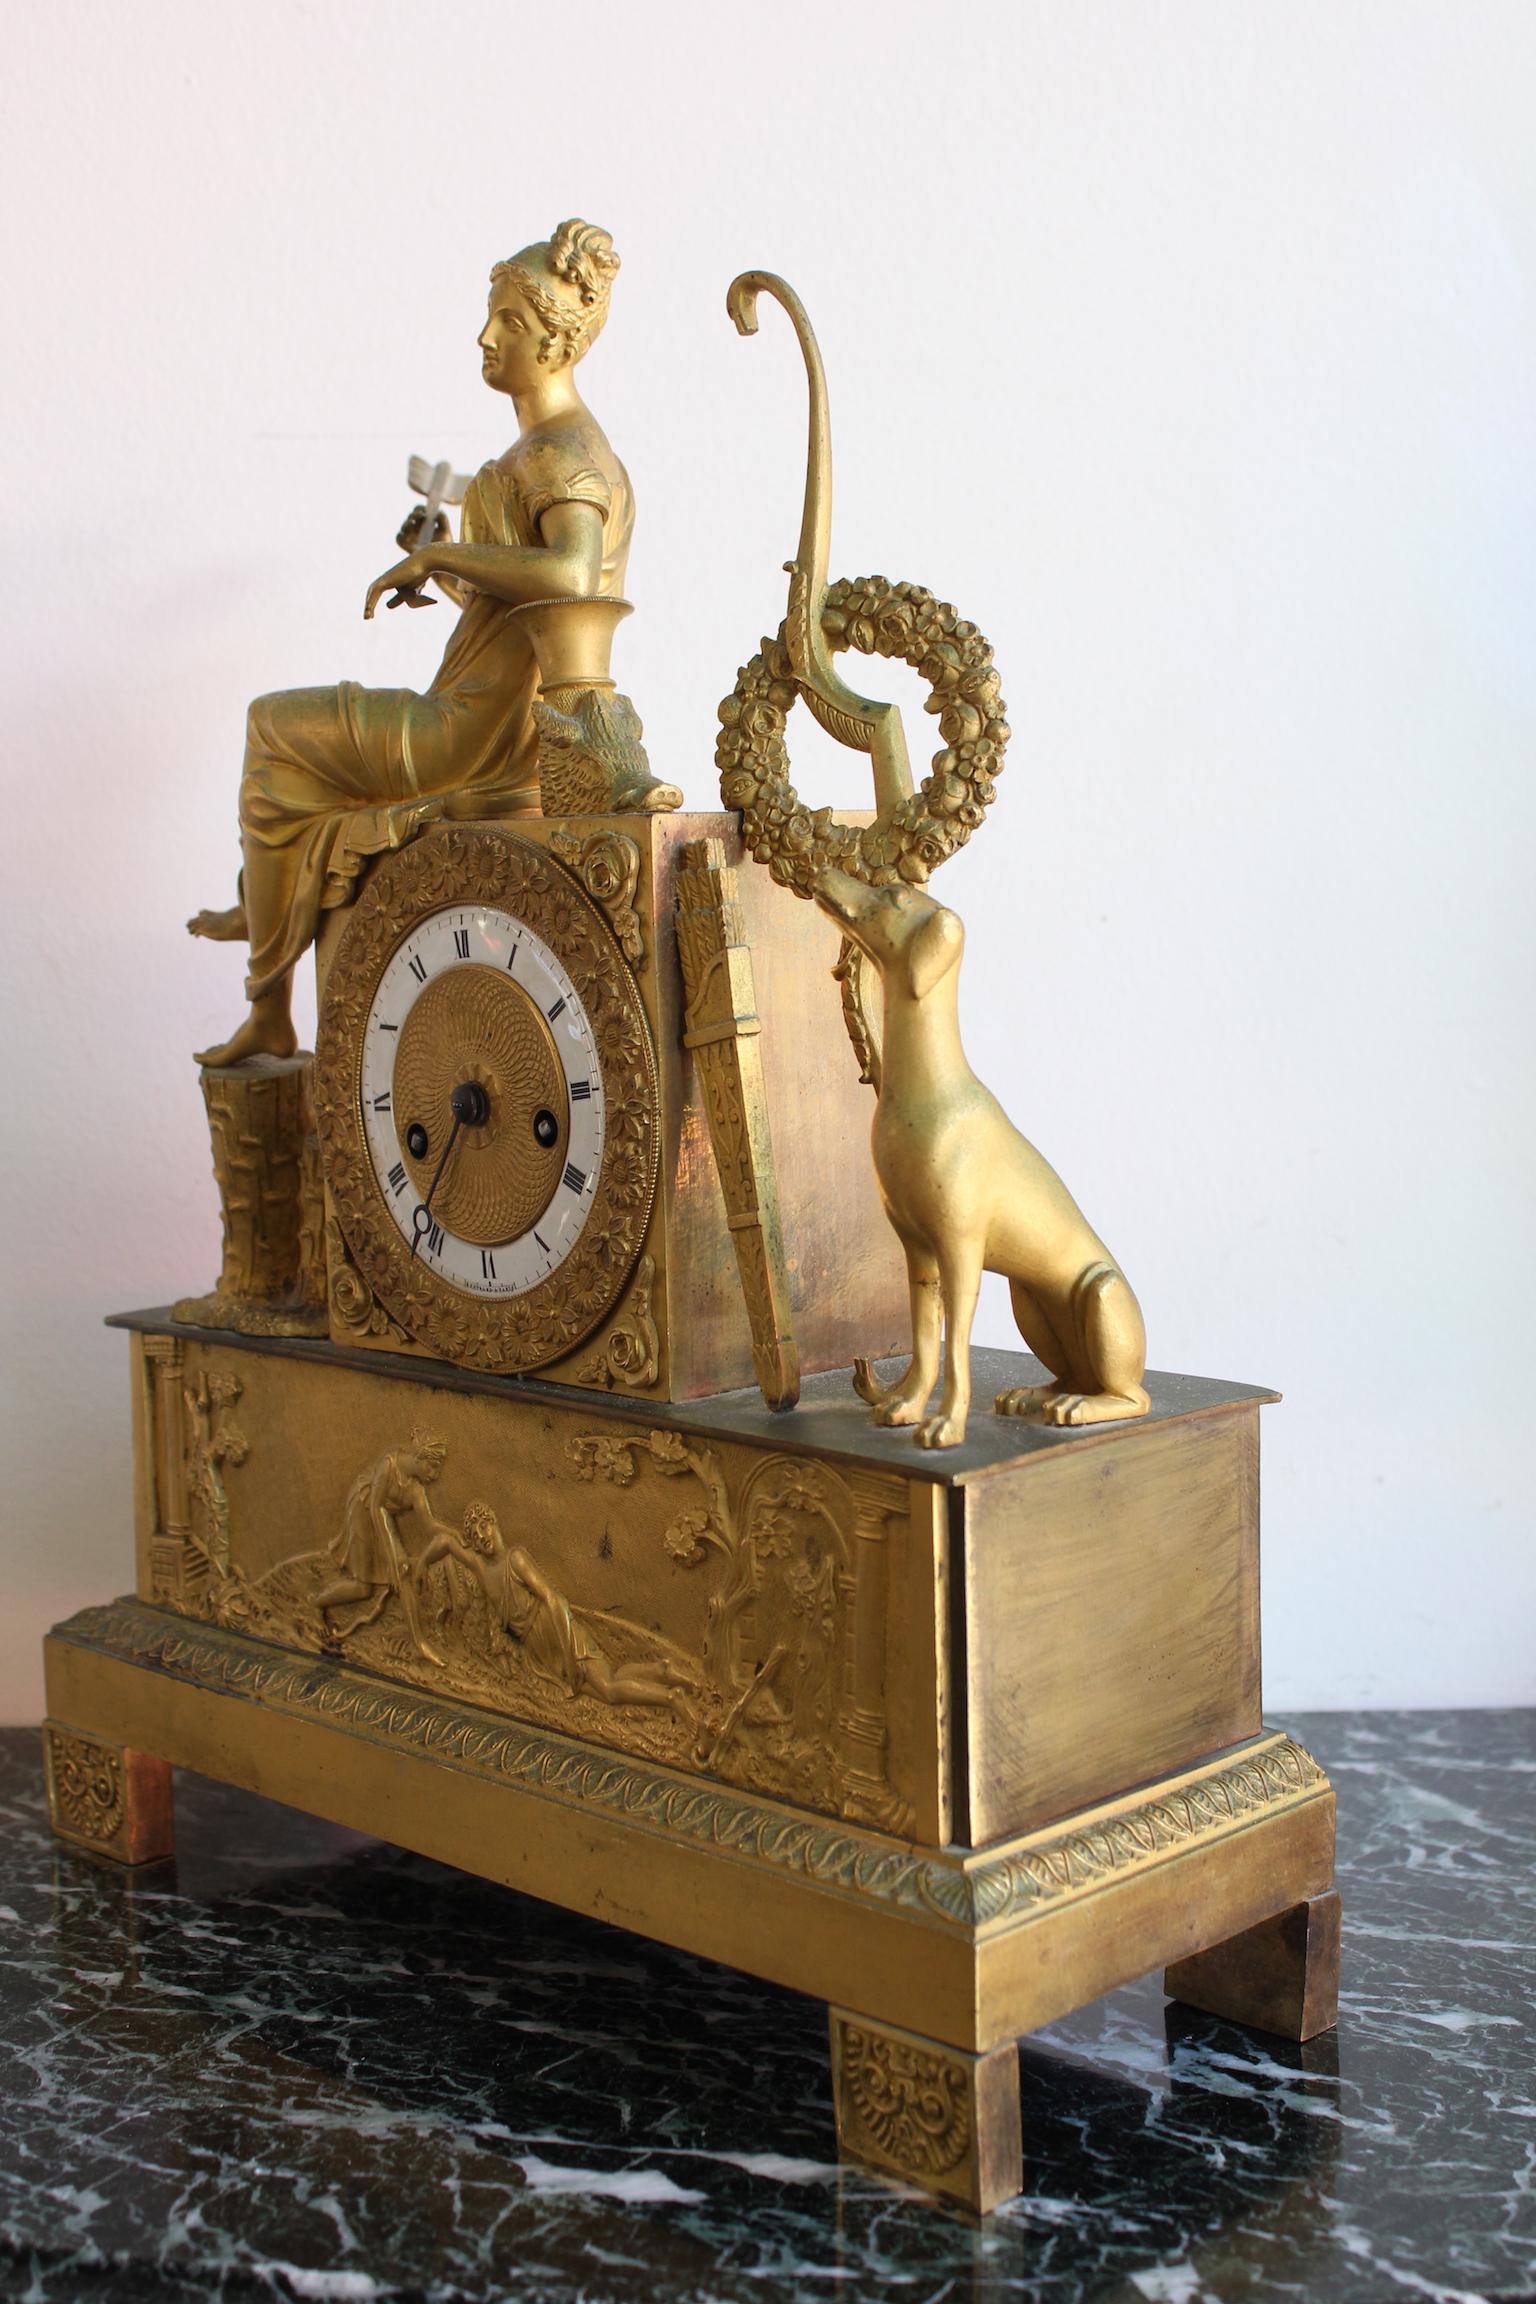 French Restauration clock in gilded bronze, representing an Allegory of hunt.
Dimensions: Width 28.5cm, depth 10.5cm, height 35.5cm.